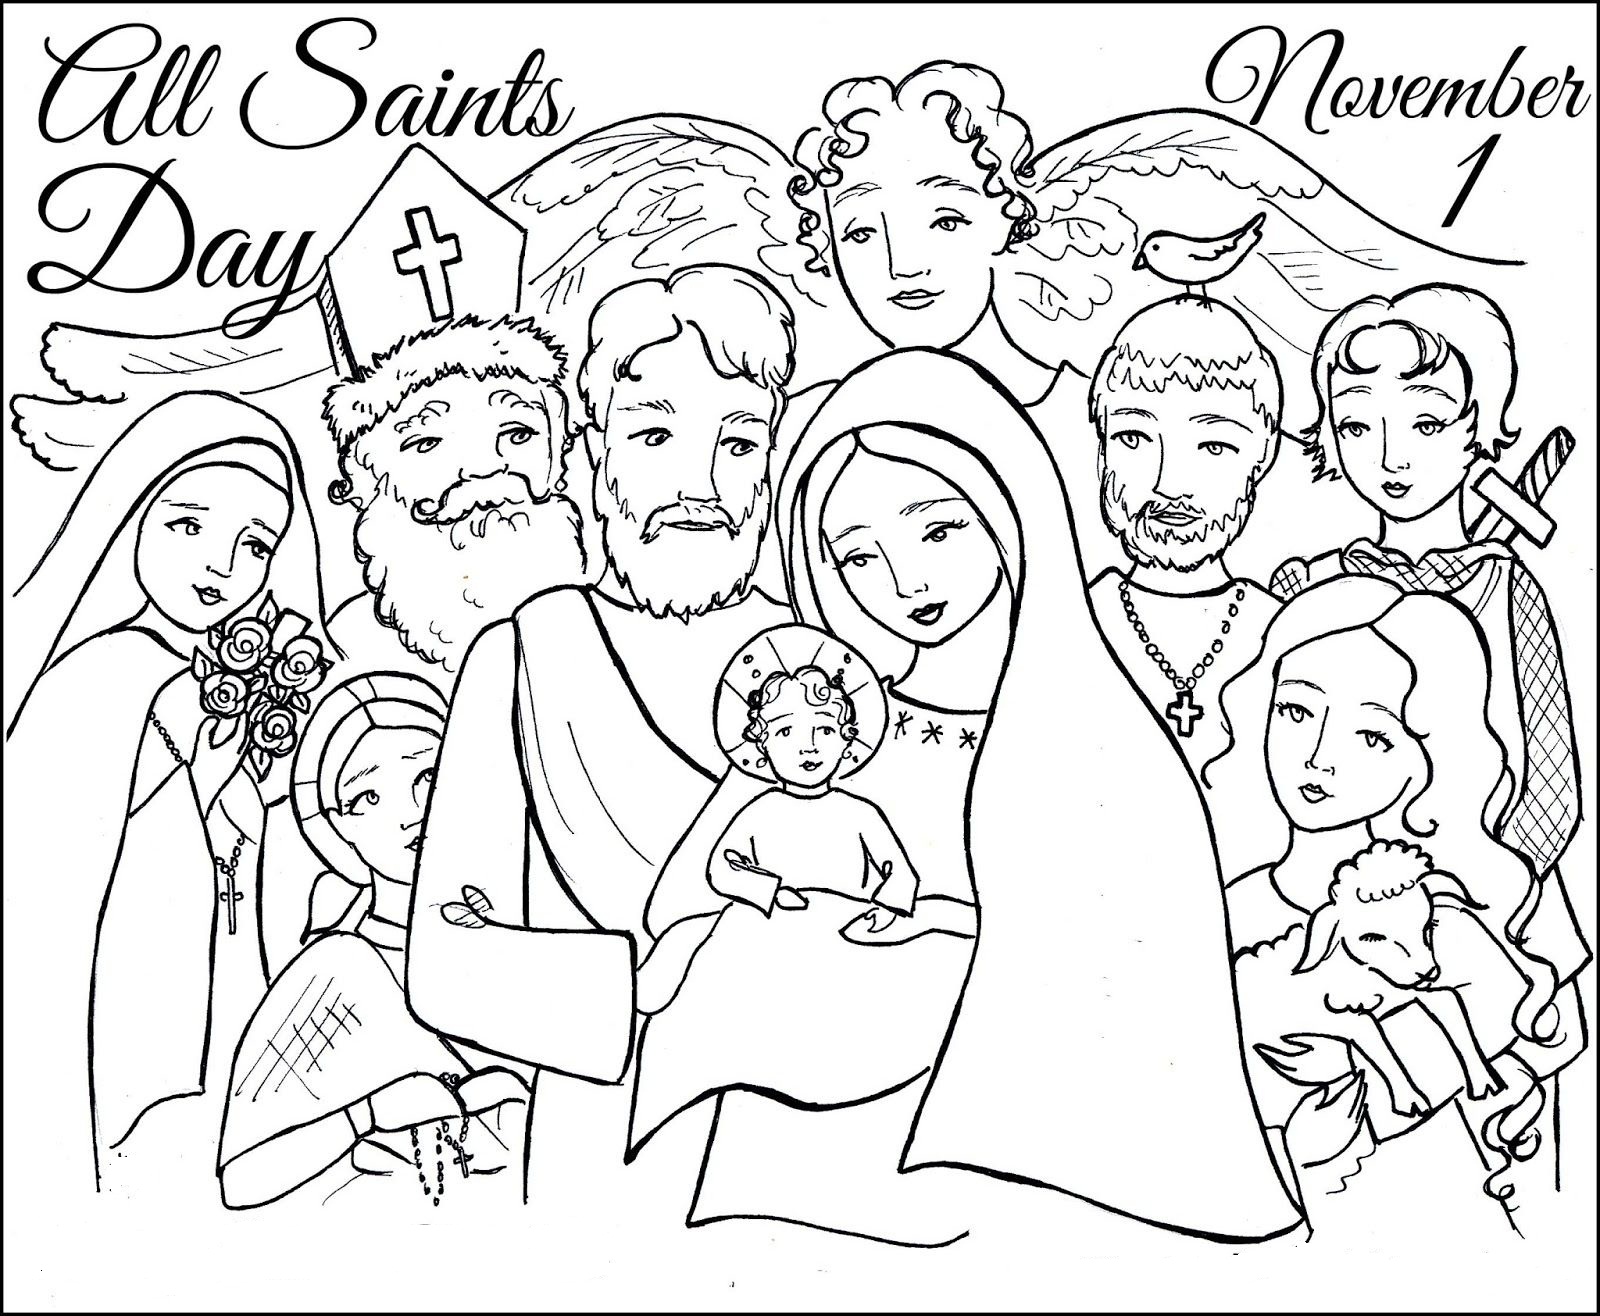 All saints day coloring page activity shelter